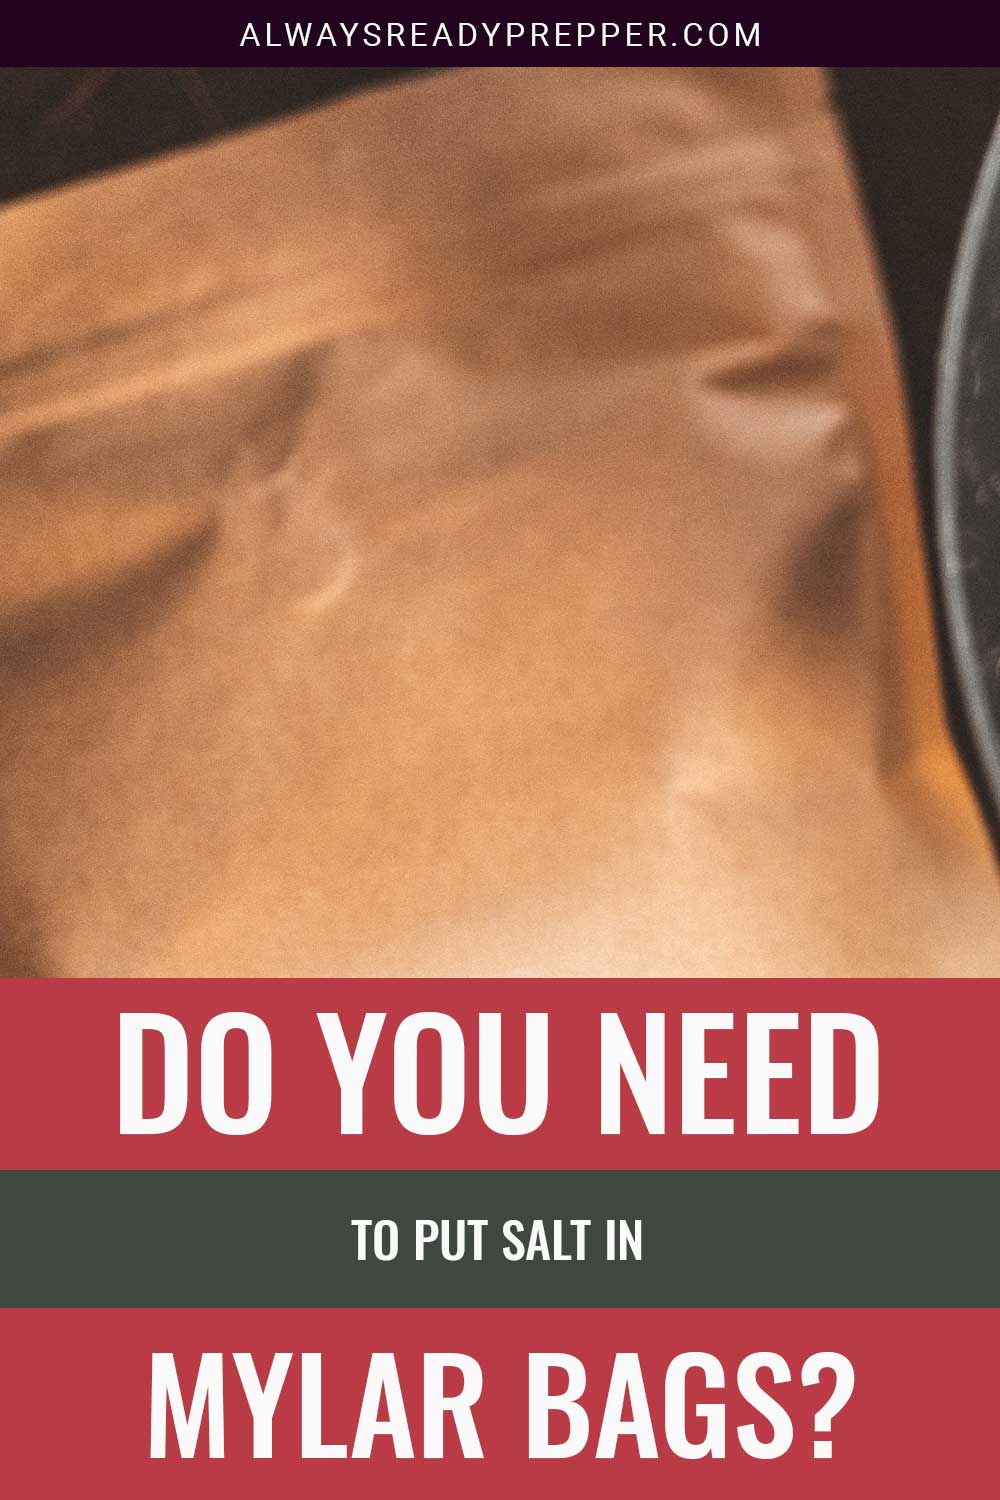 A mylar bag - Do You Need To Put Salt In it?